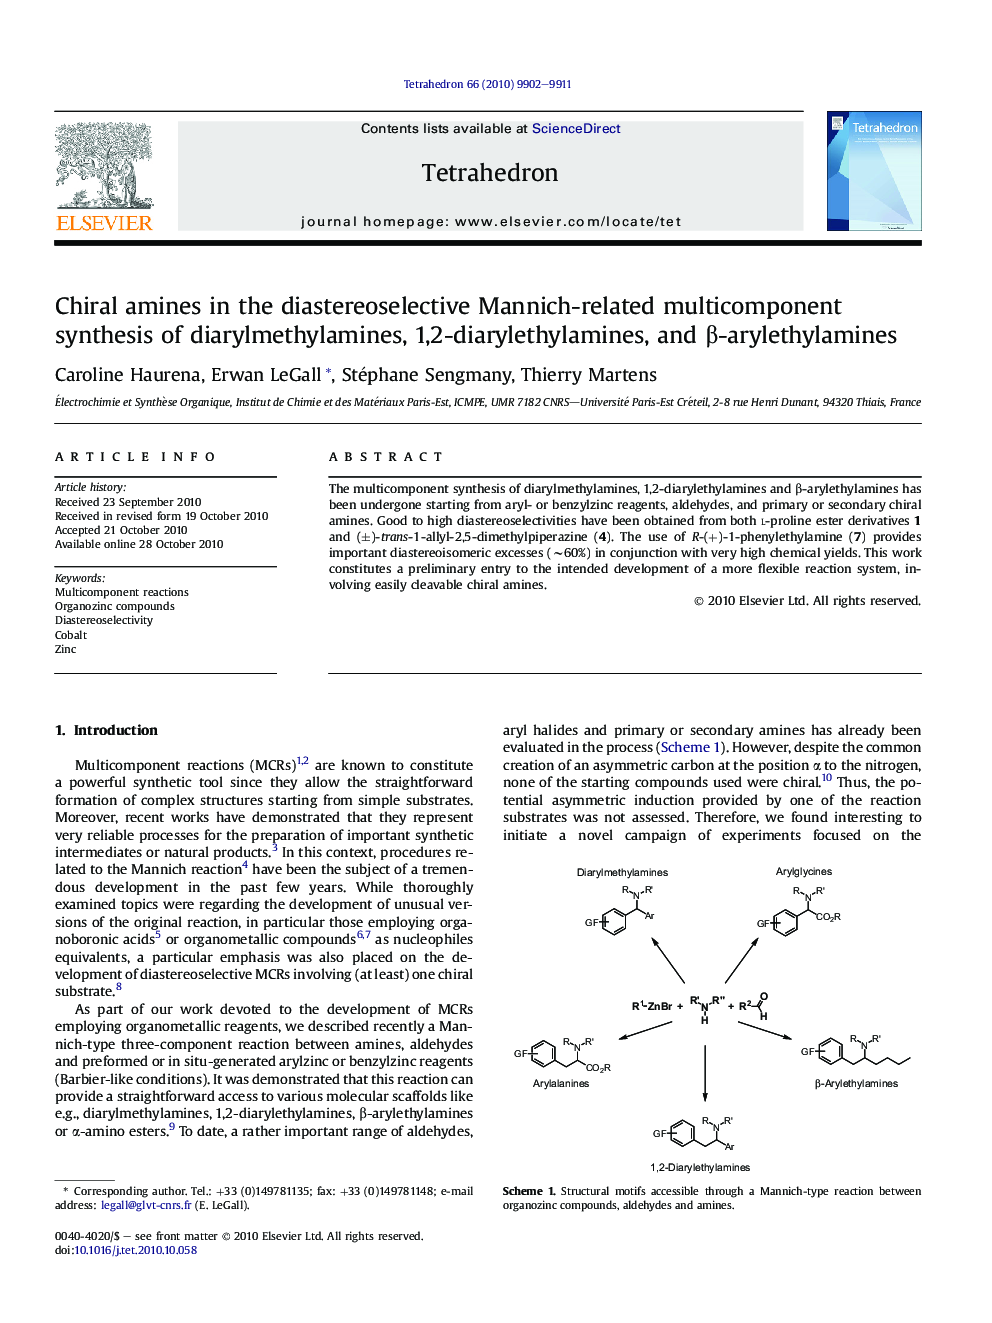 Chiral amines in the diastereoselective Mannich-related multicomponent synthesis of diarylmethylamines, 1,2-diarylethylamines, and Î²-arylethylamines